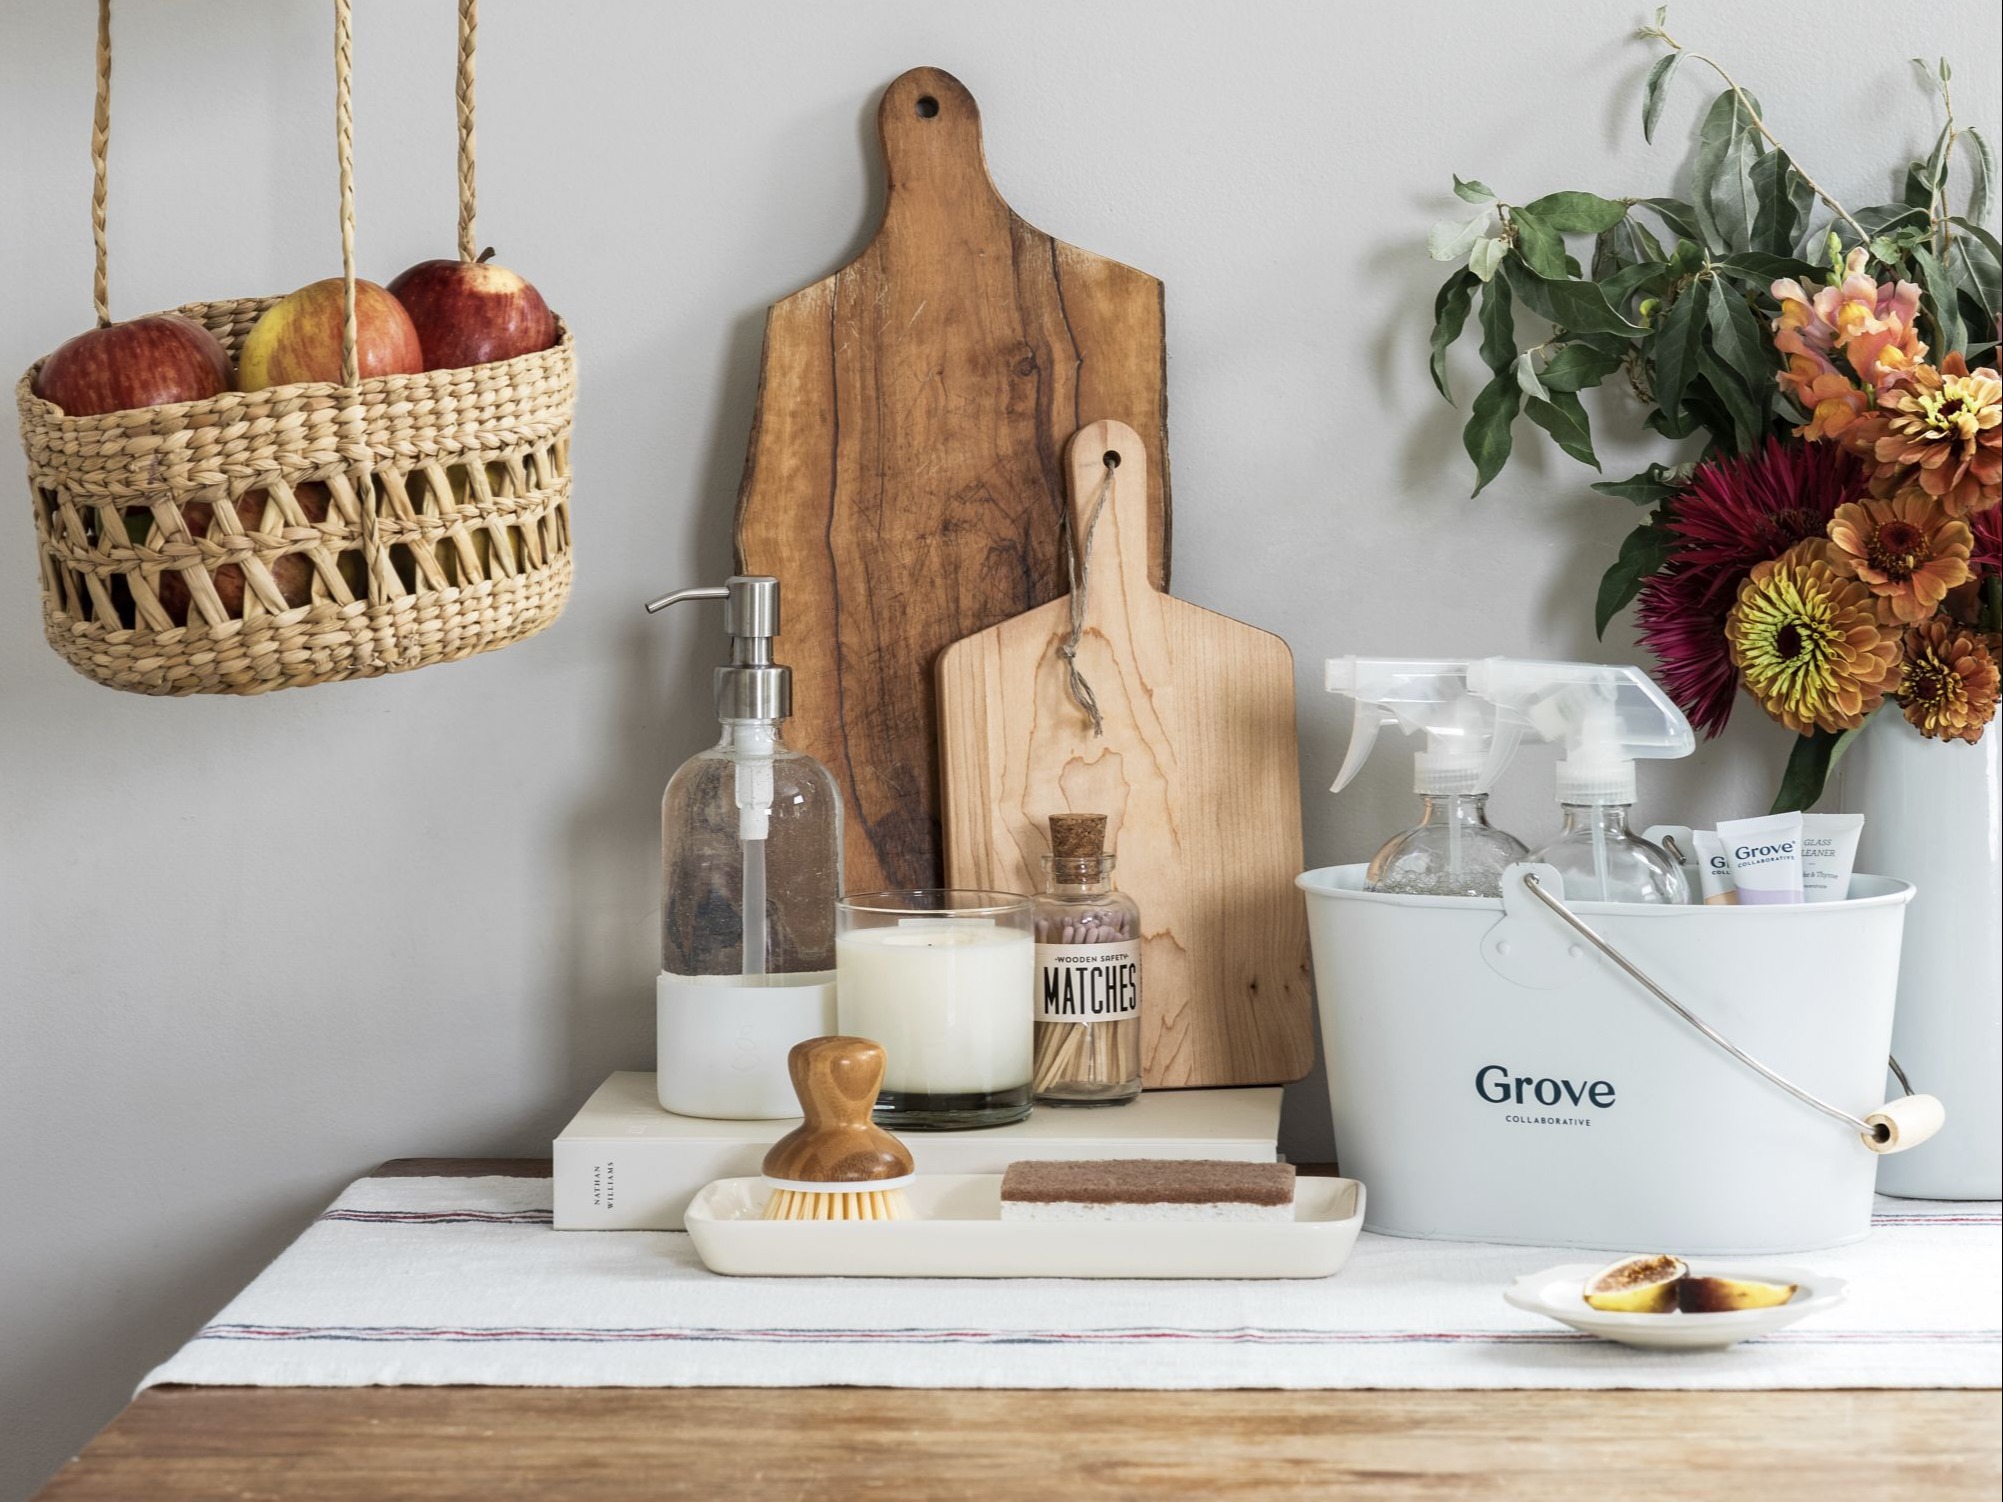 Image of Grove cleaning supplies and products on wooden counter next to cutting board and hanging basket of apples